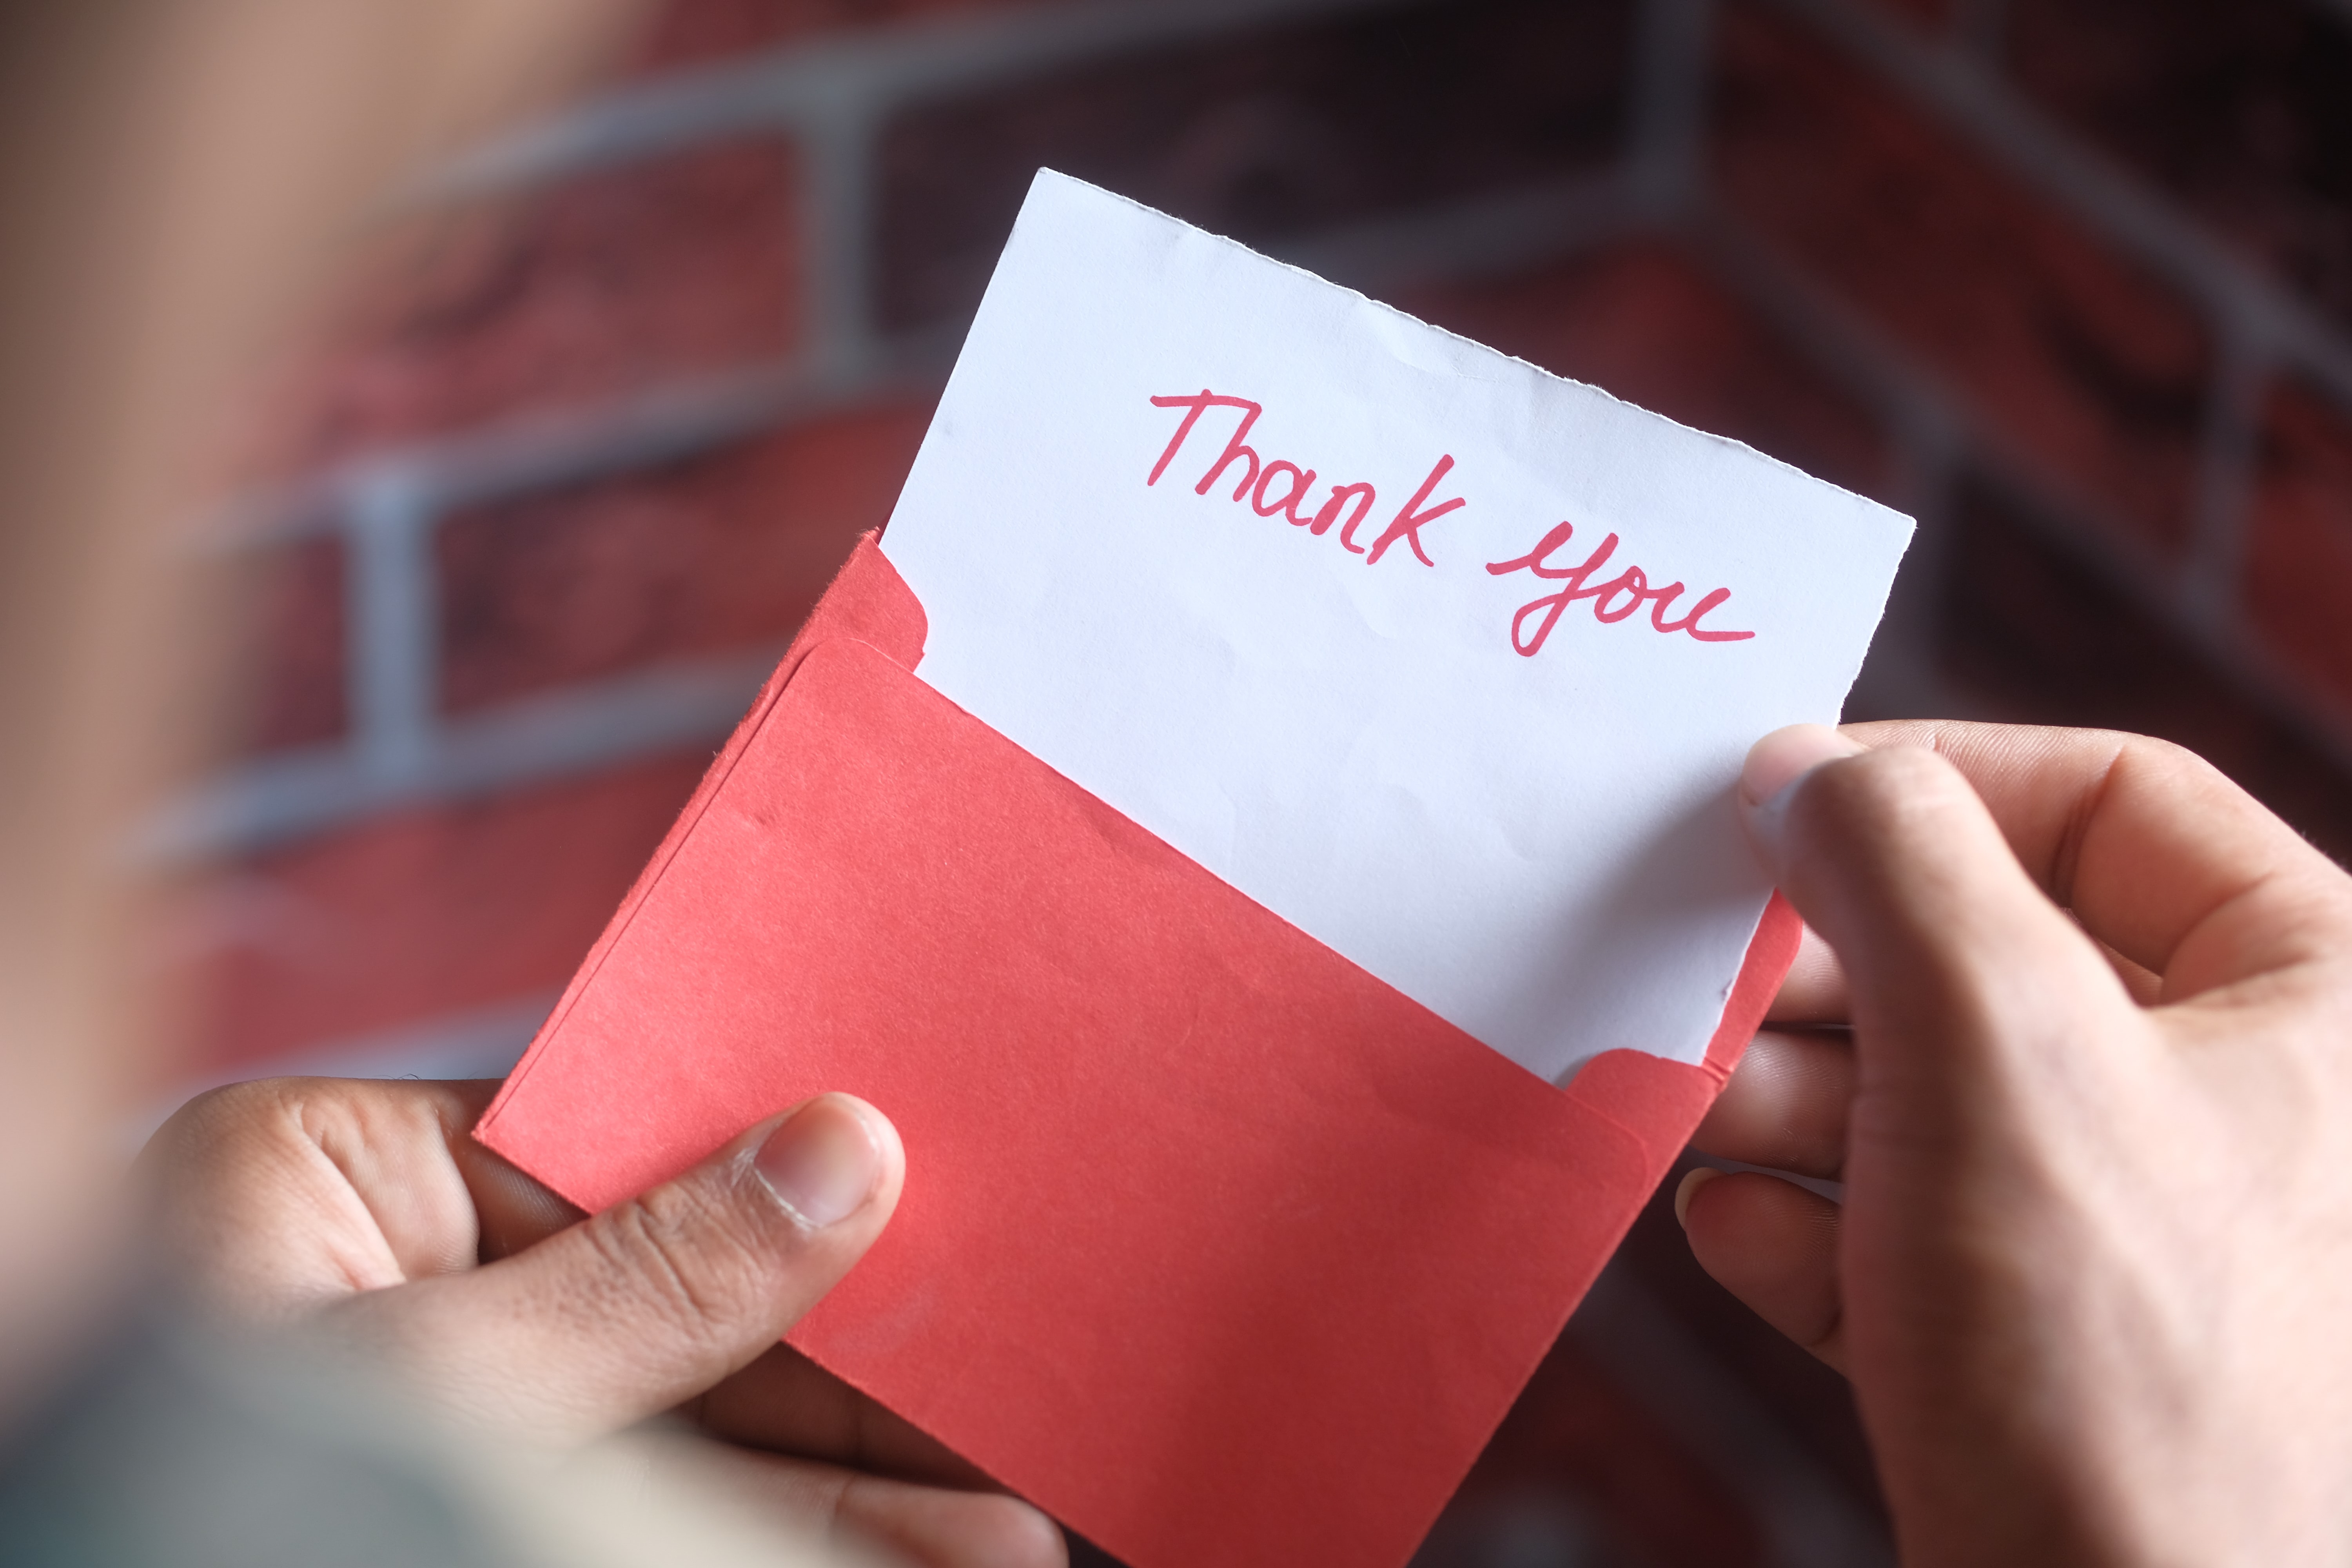 Thank you card in red envelope